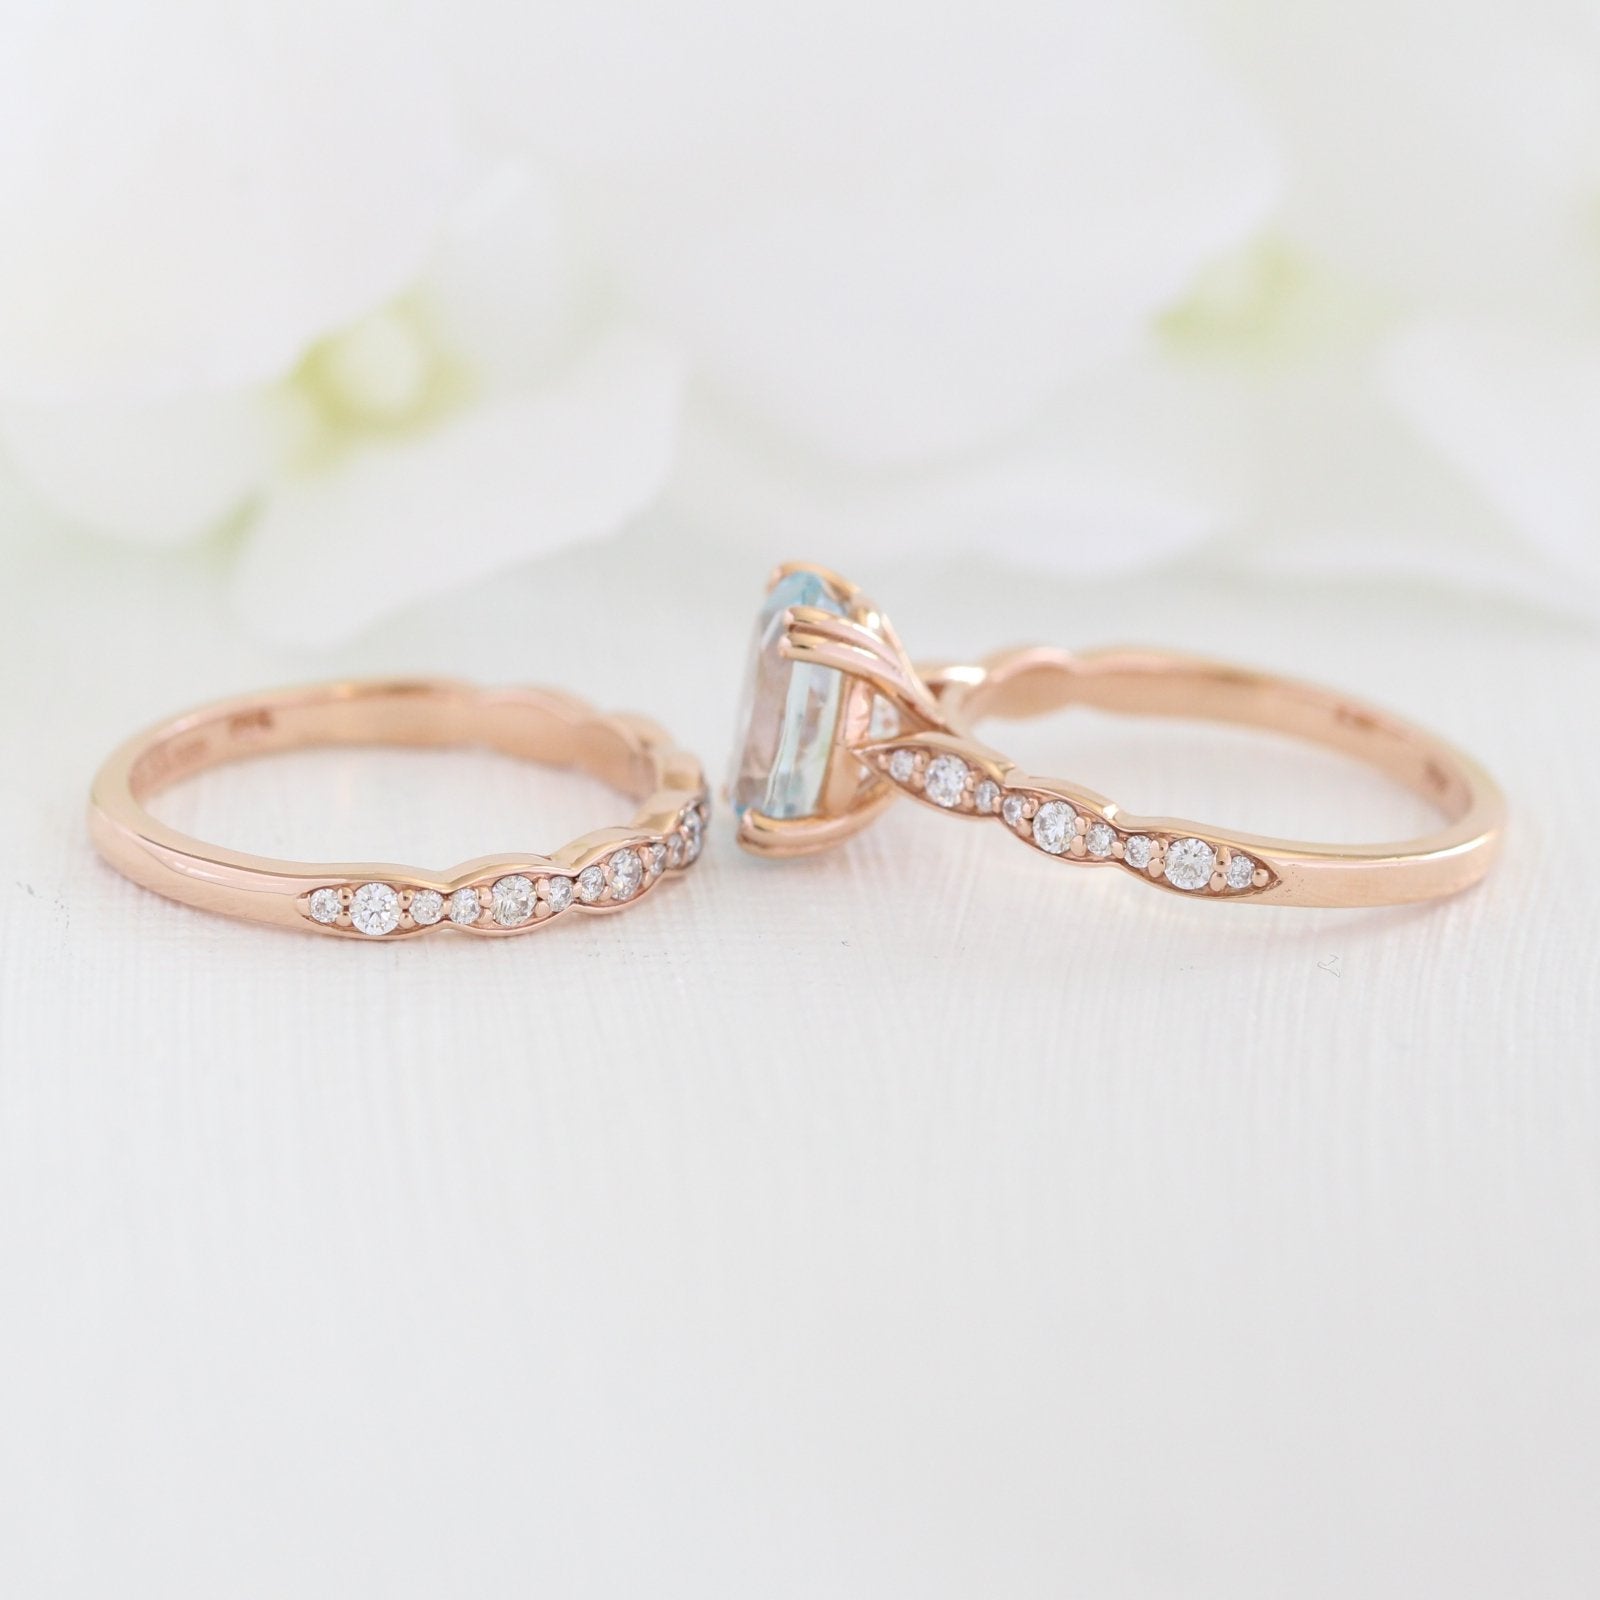 solitaire aquamarine ring bridal set in rose gold scalloped diamond band by la more design